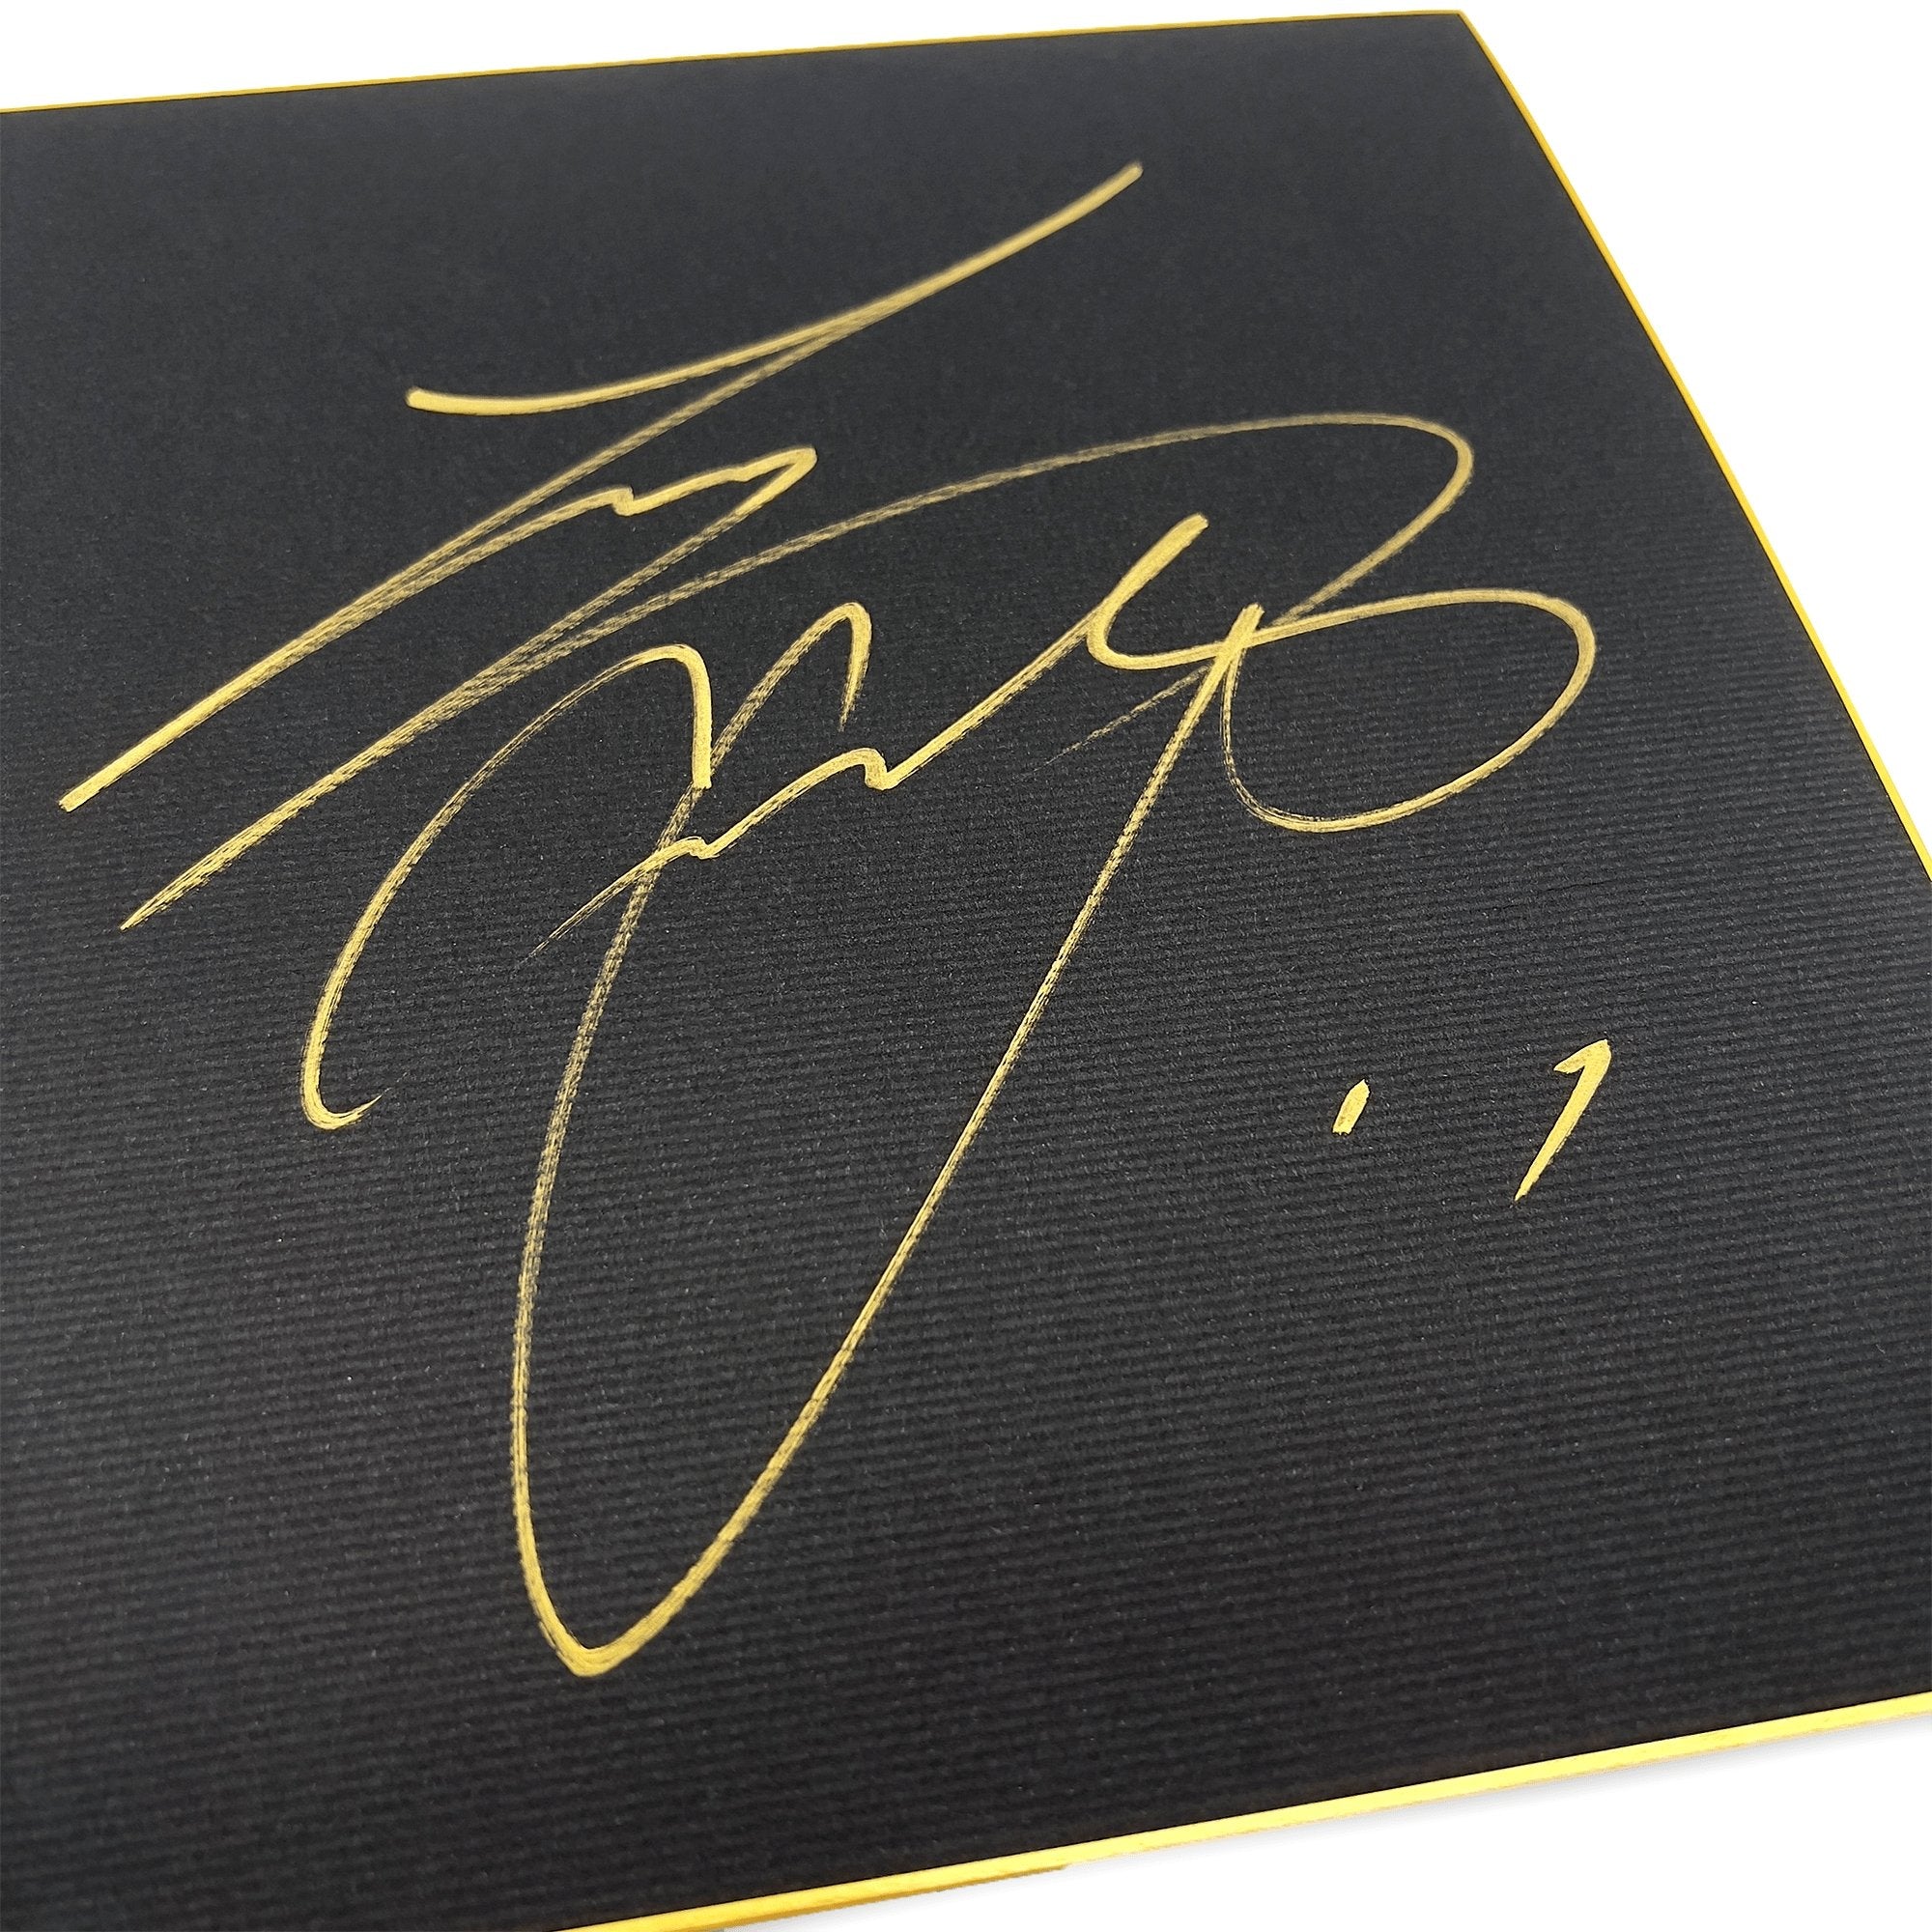 Sold at Auction: Shohei Ohtani Signed Hokkaido Nippon-Ham Fighters